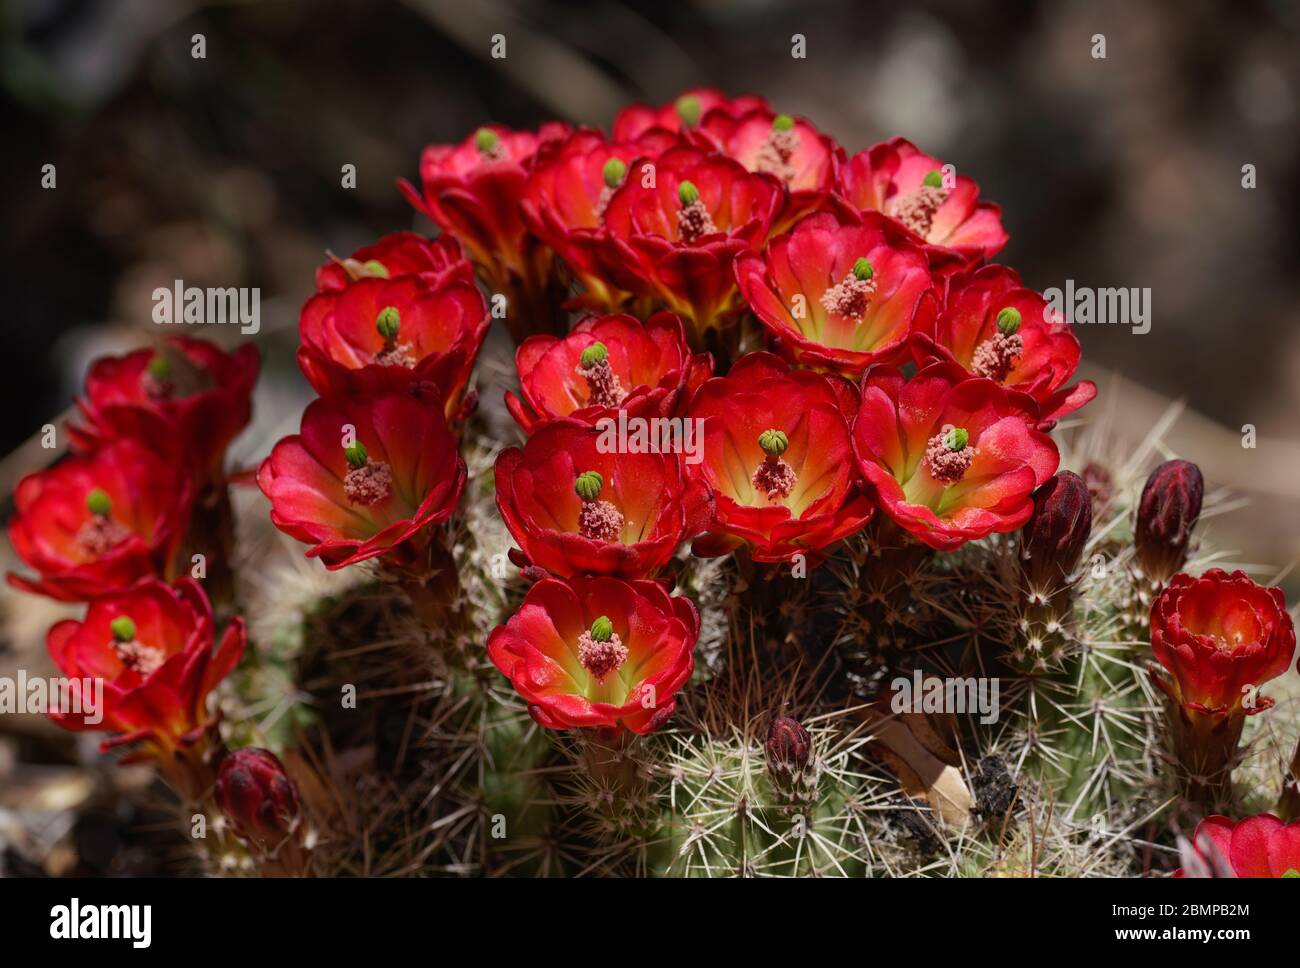 Bright Red Flowers Blooming from a Small Cactus Create a Natural Spring Bouquet Stock Photo